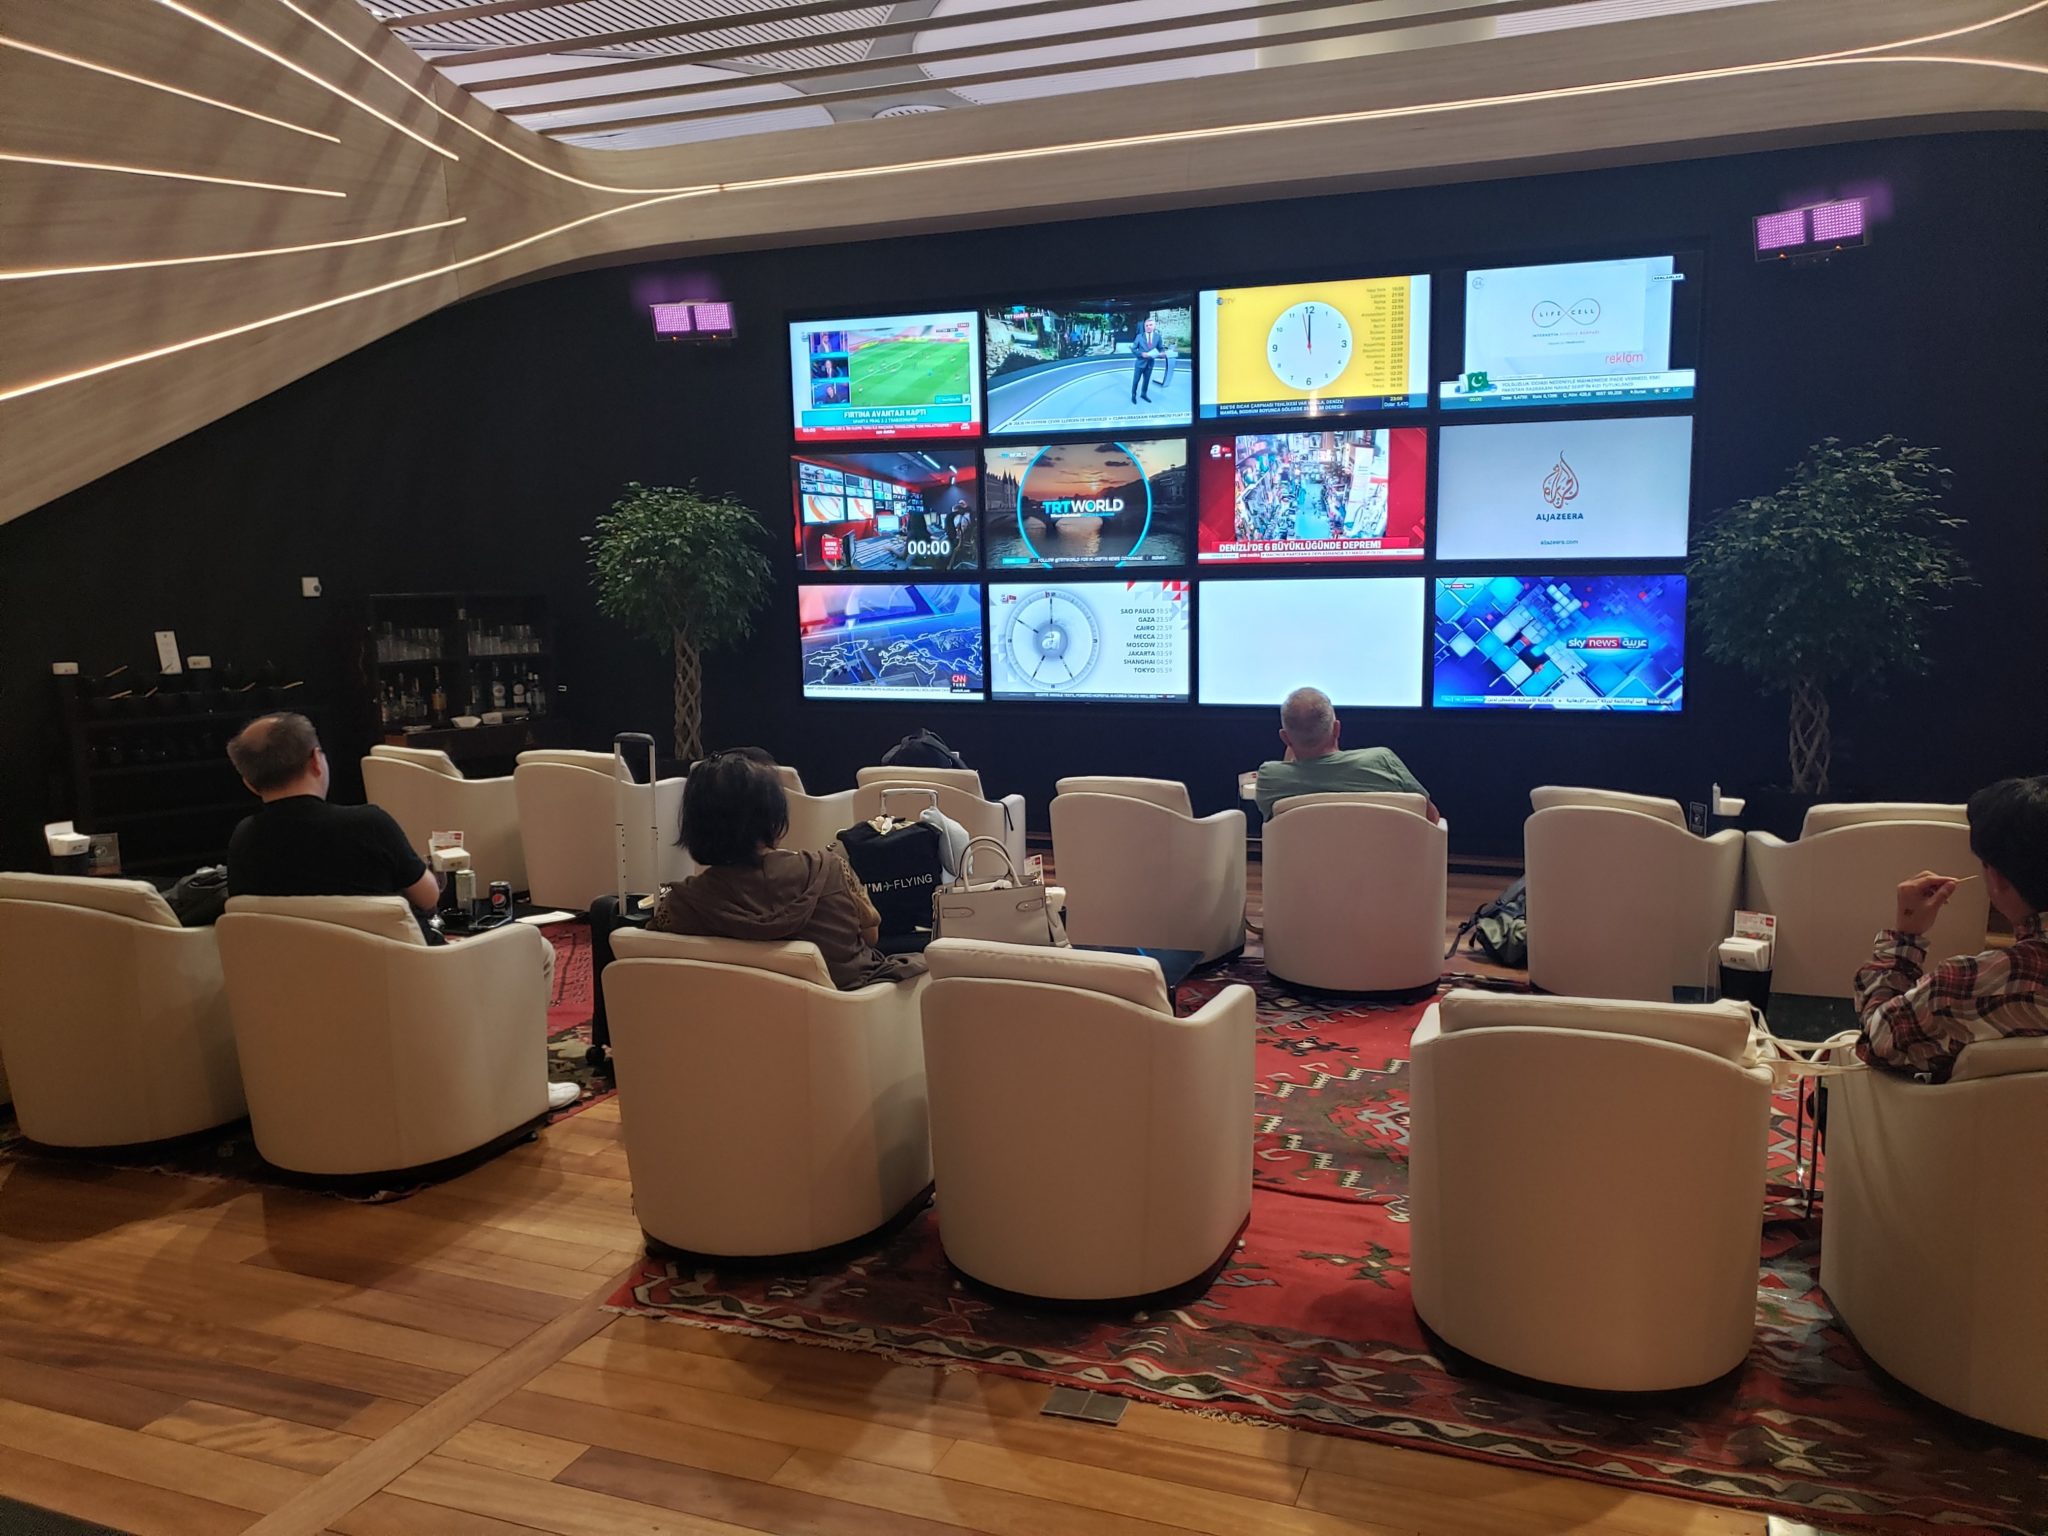 a group of people sitting in chairs in a room with large screens